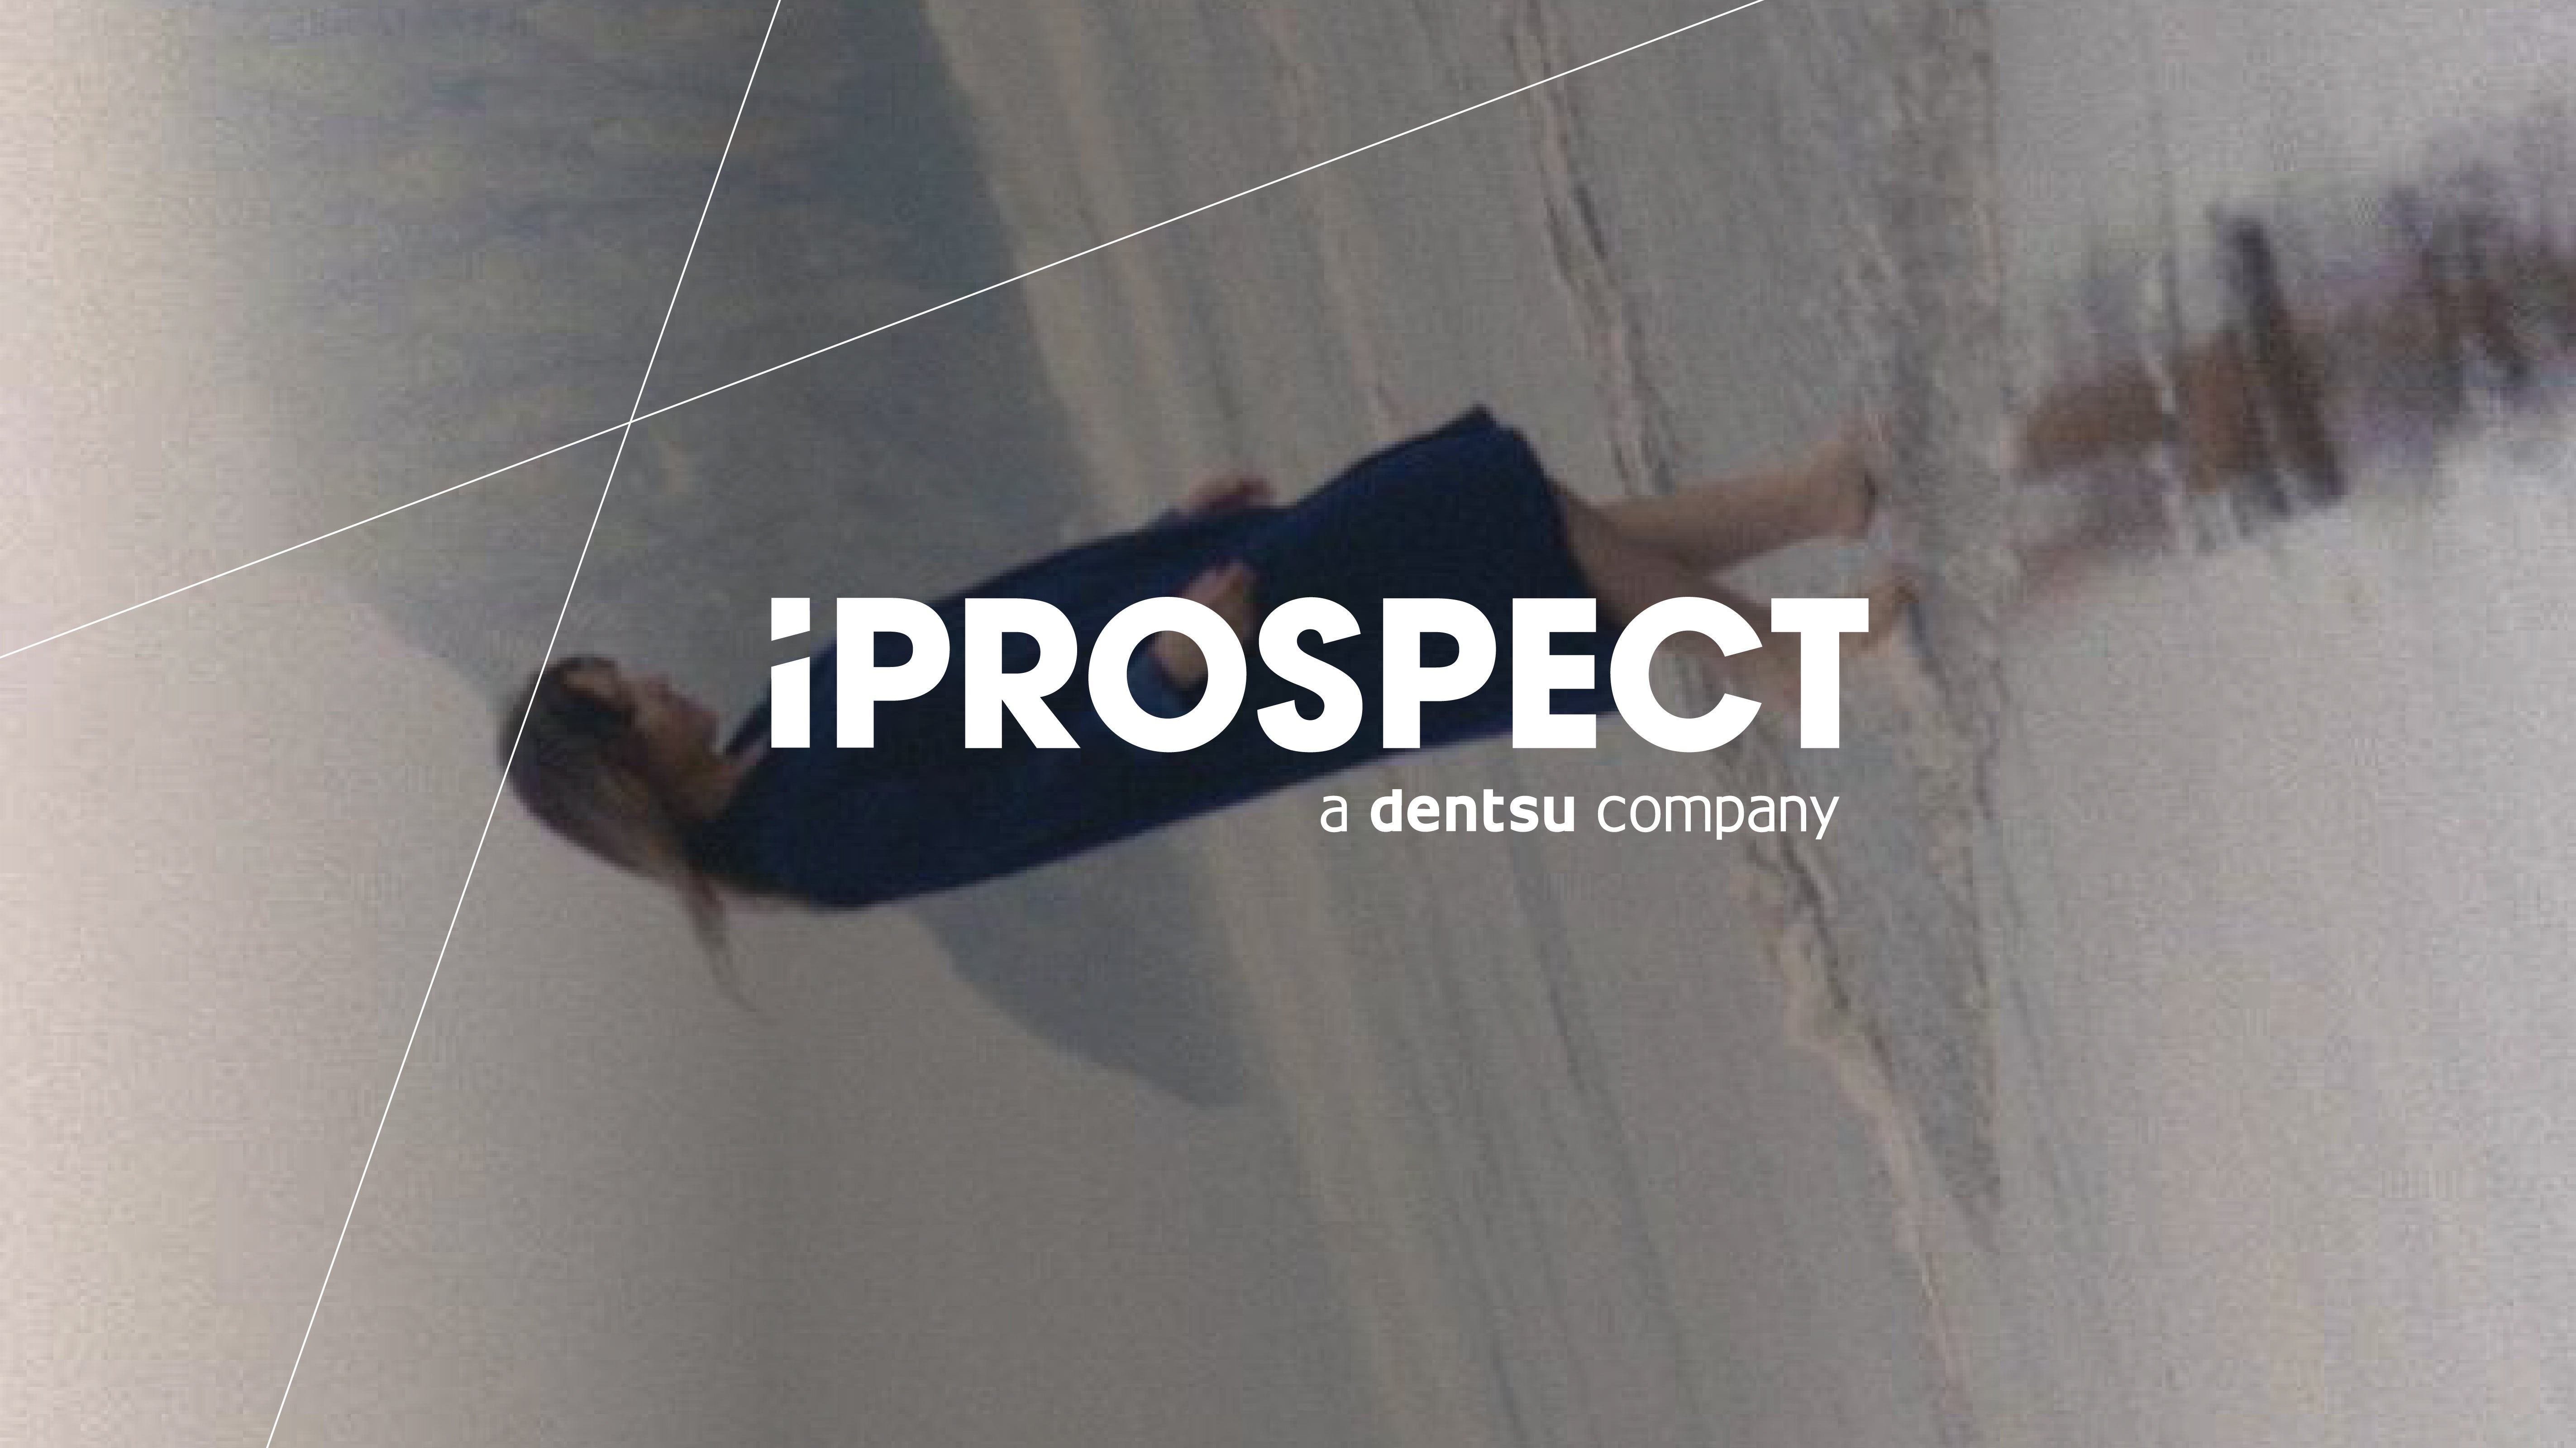 iProspect | Where has spontaneity shifted to in a world craving stability?